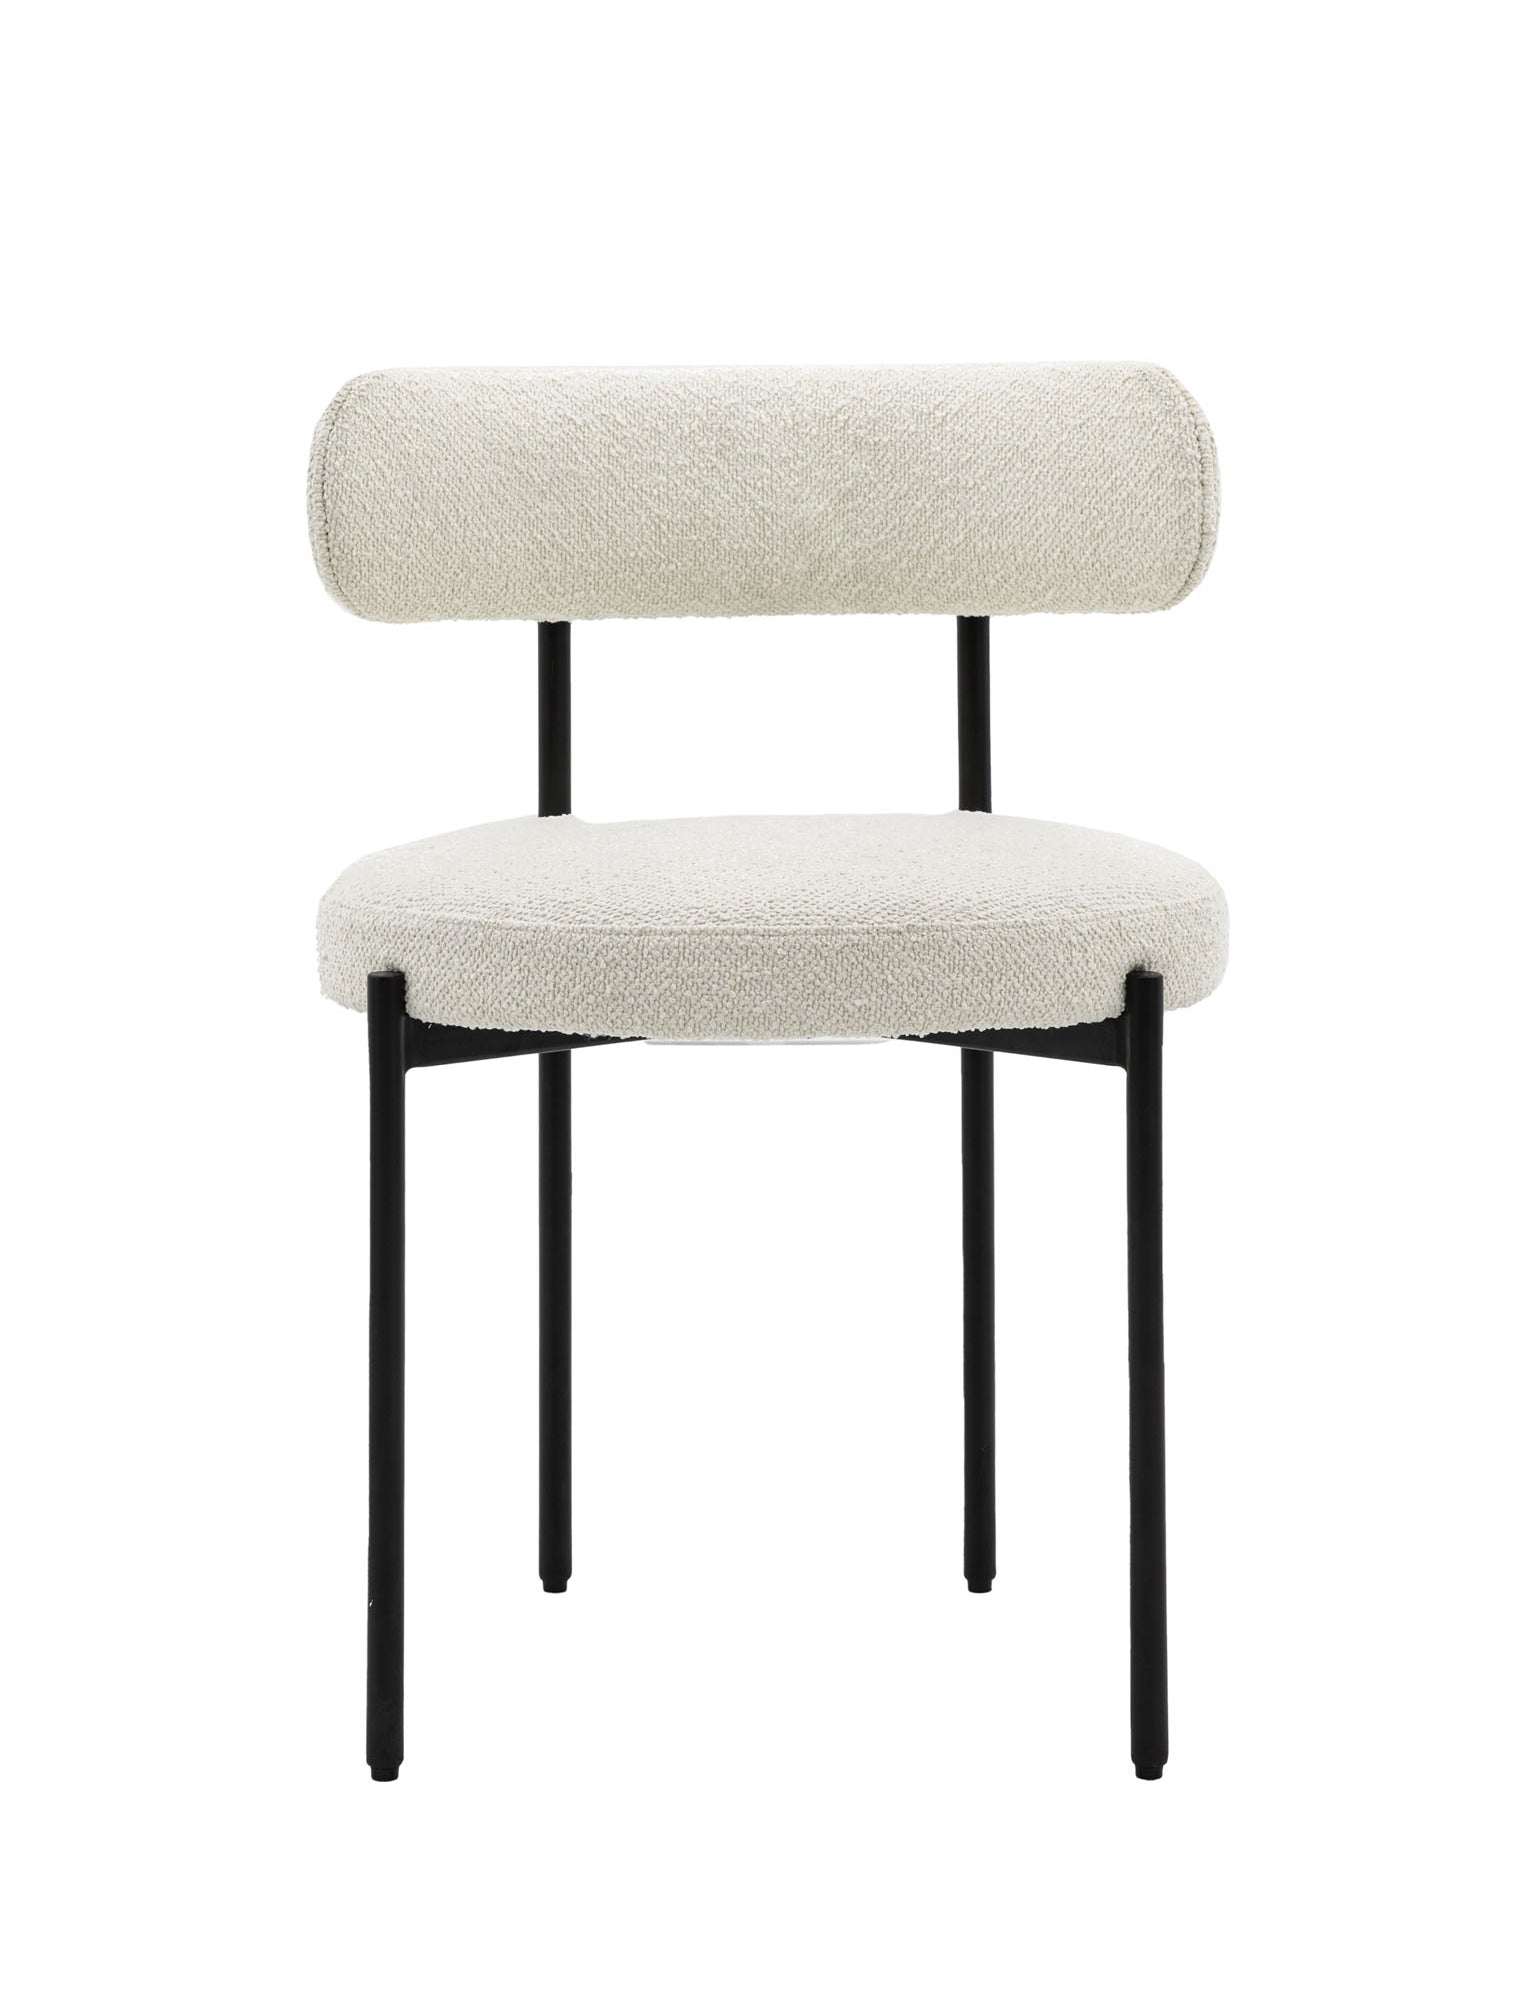 Dining chair upholstered in cream fabric with black metal legs